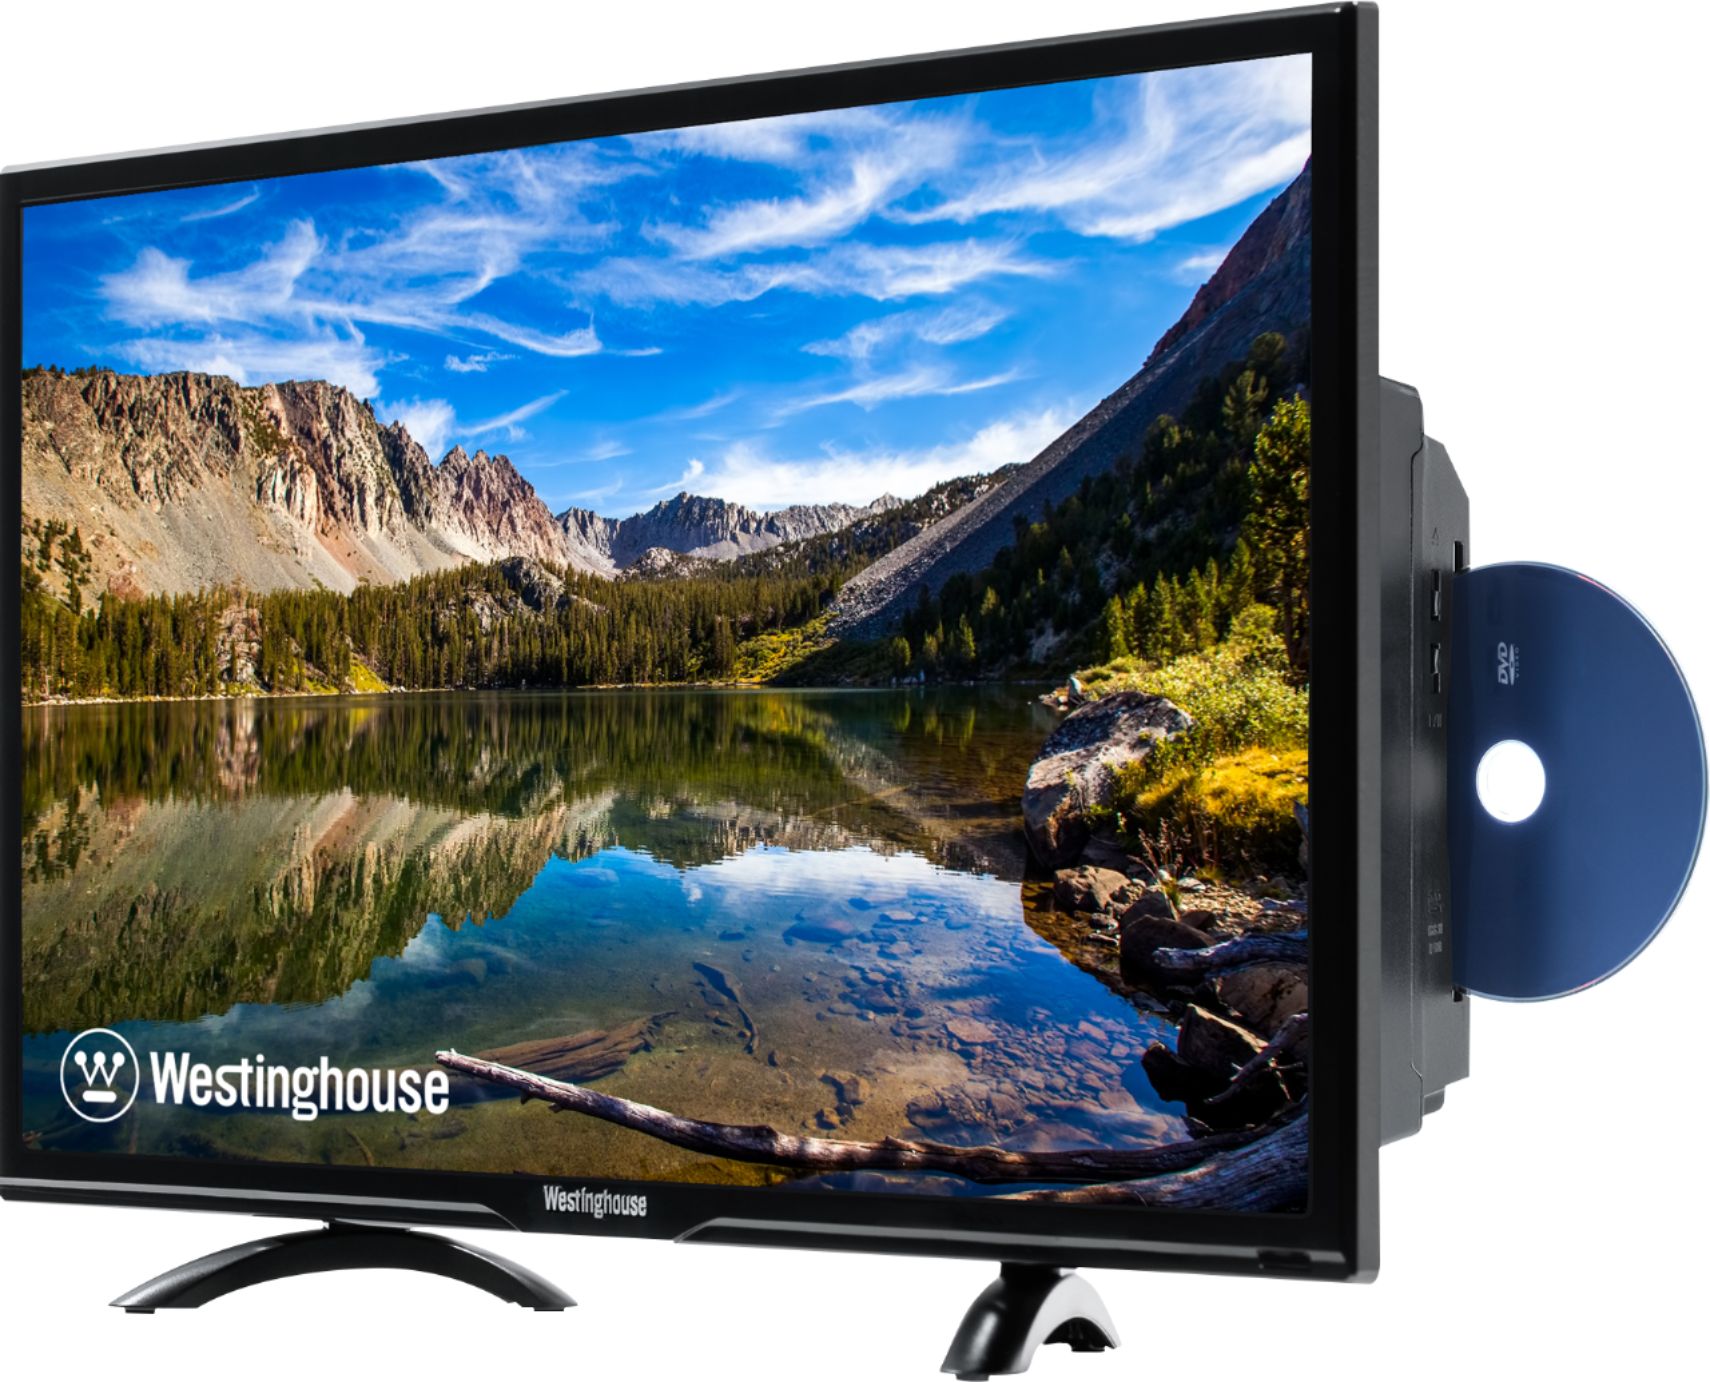 Westinghouse WD32HX5201 Television 32″ HD DVD Combo TV